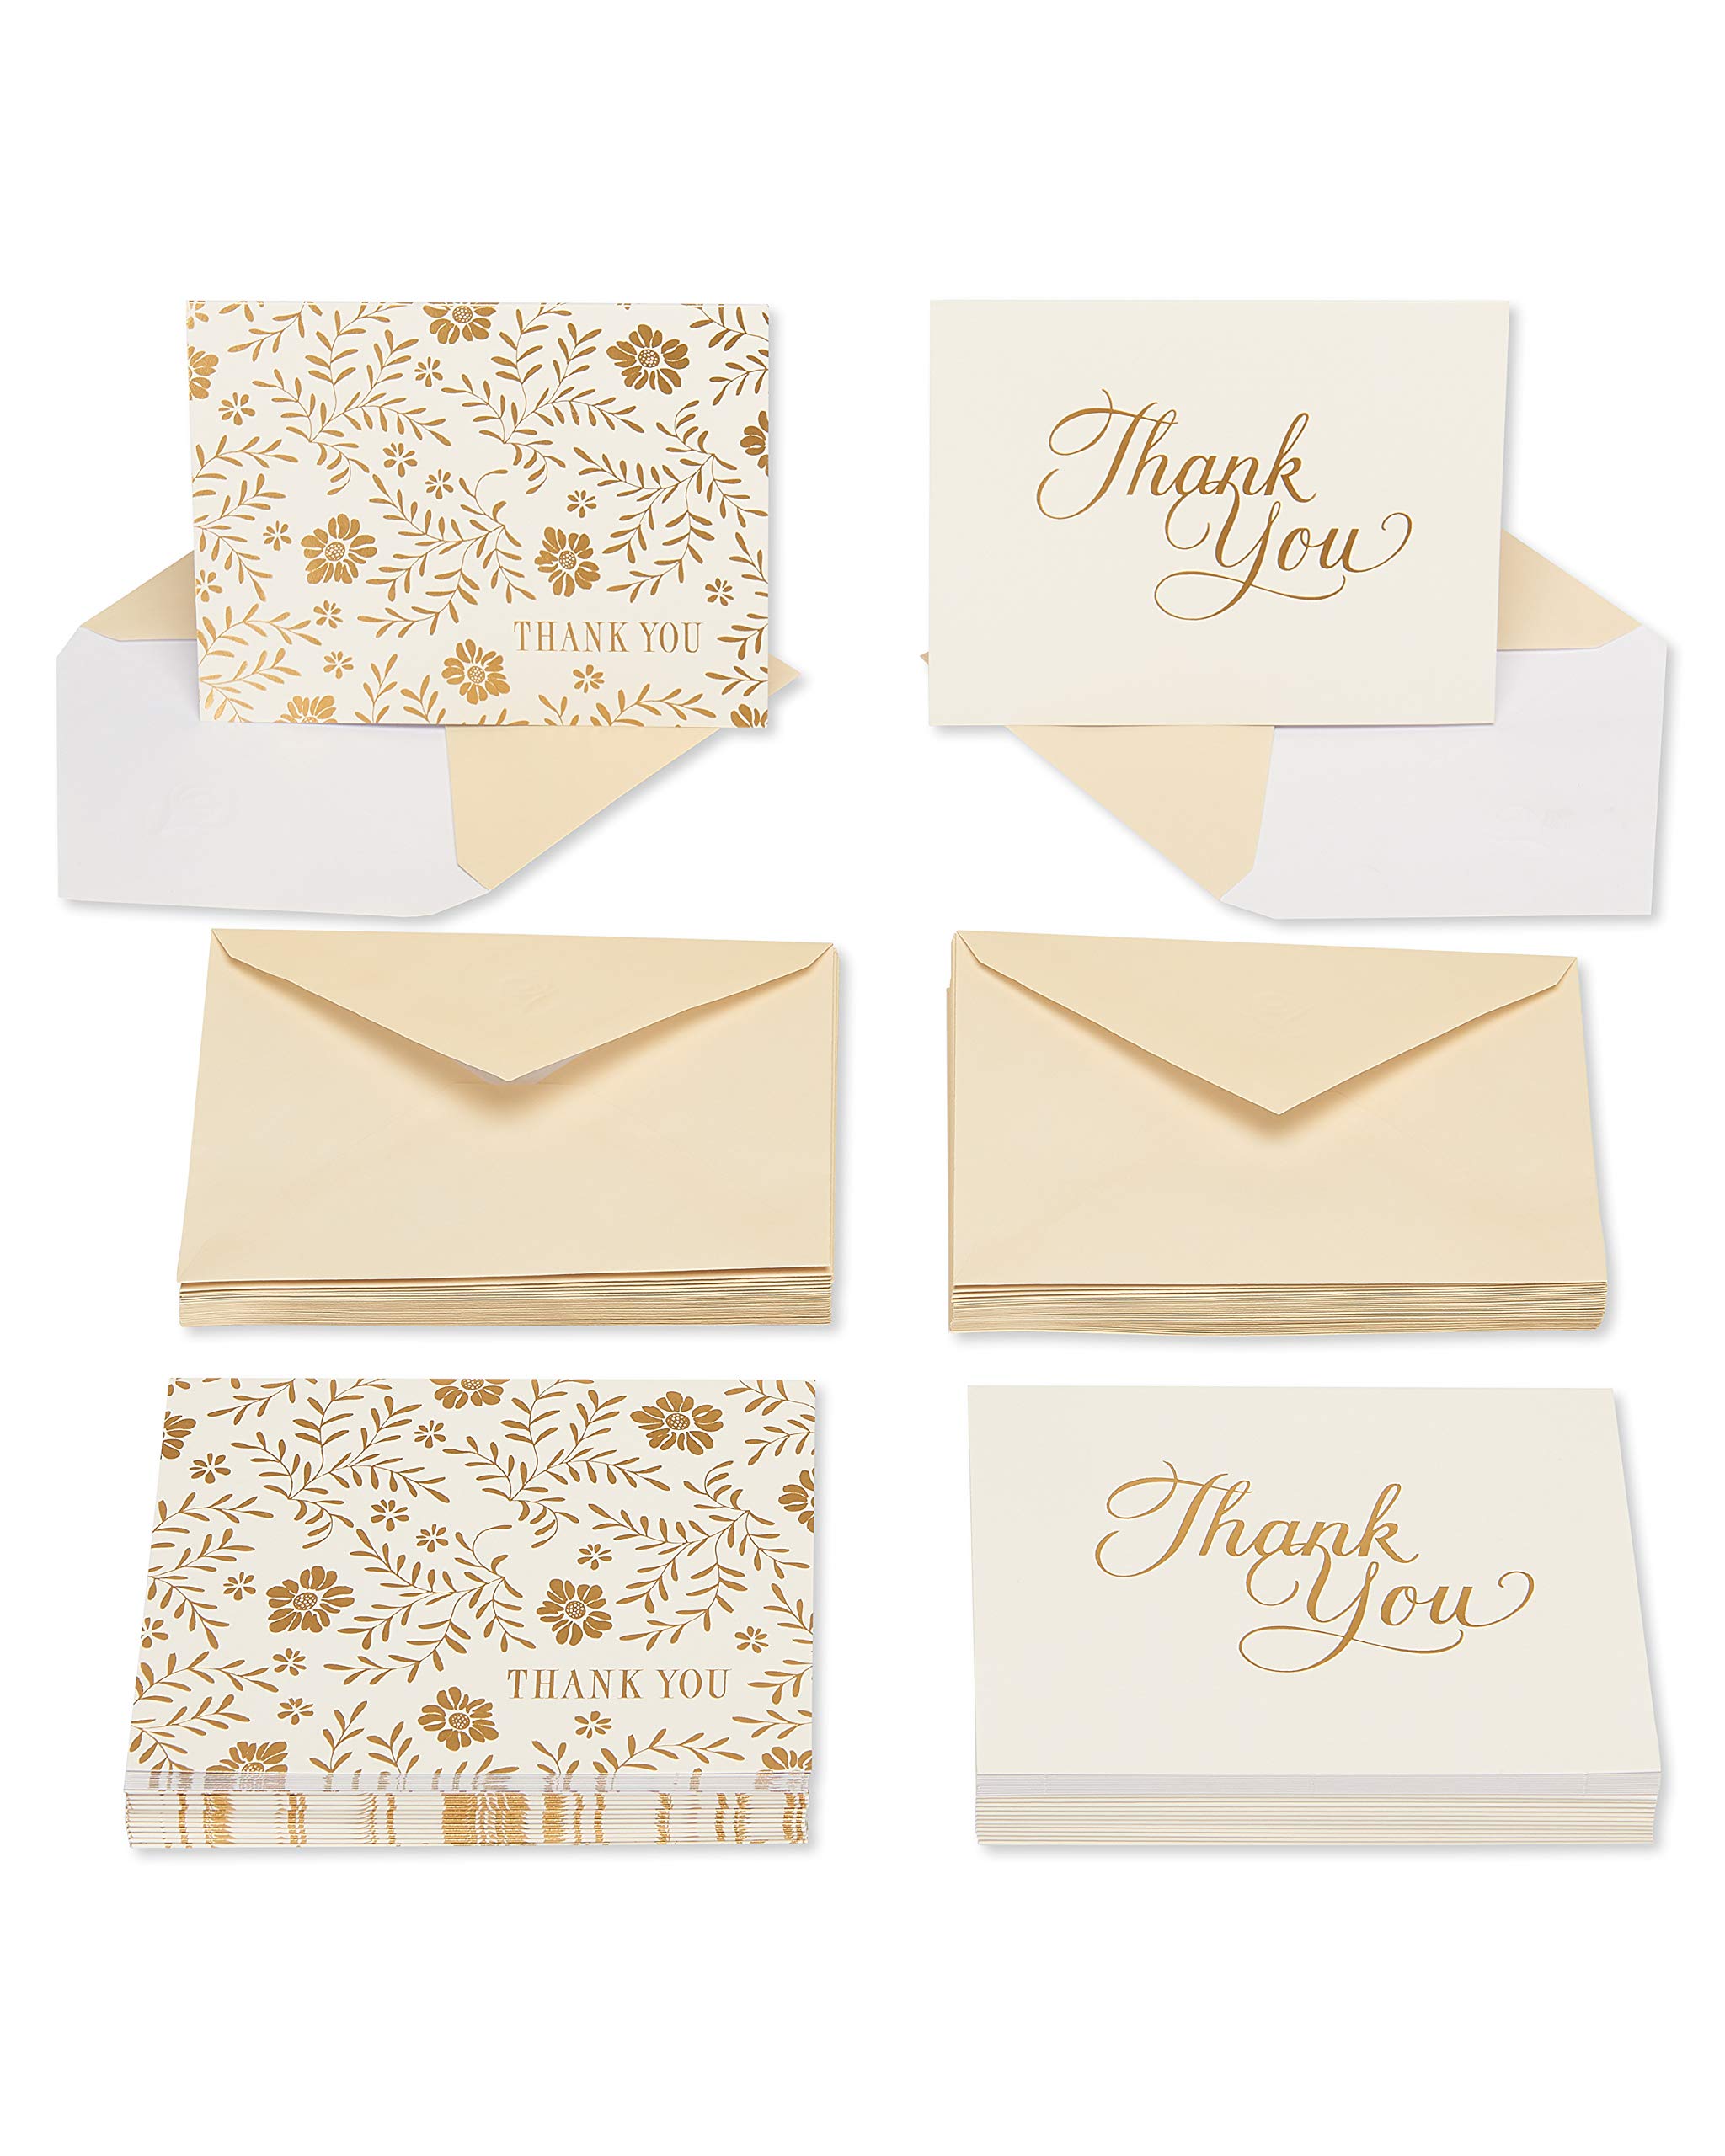 American Greetings Wedding Thank You Cards with Envelopes, Gold and Cream (50-Count)